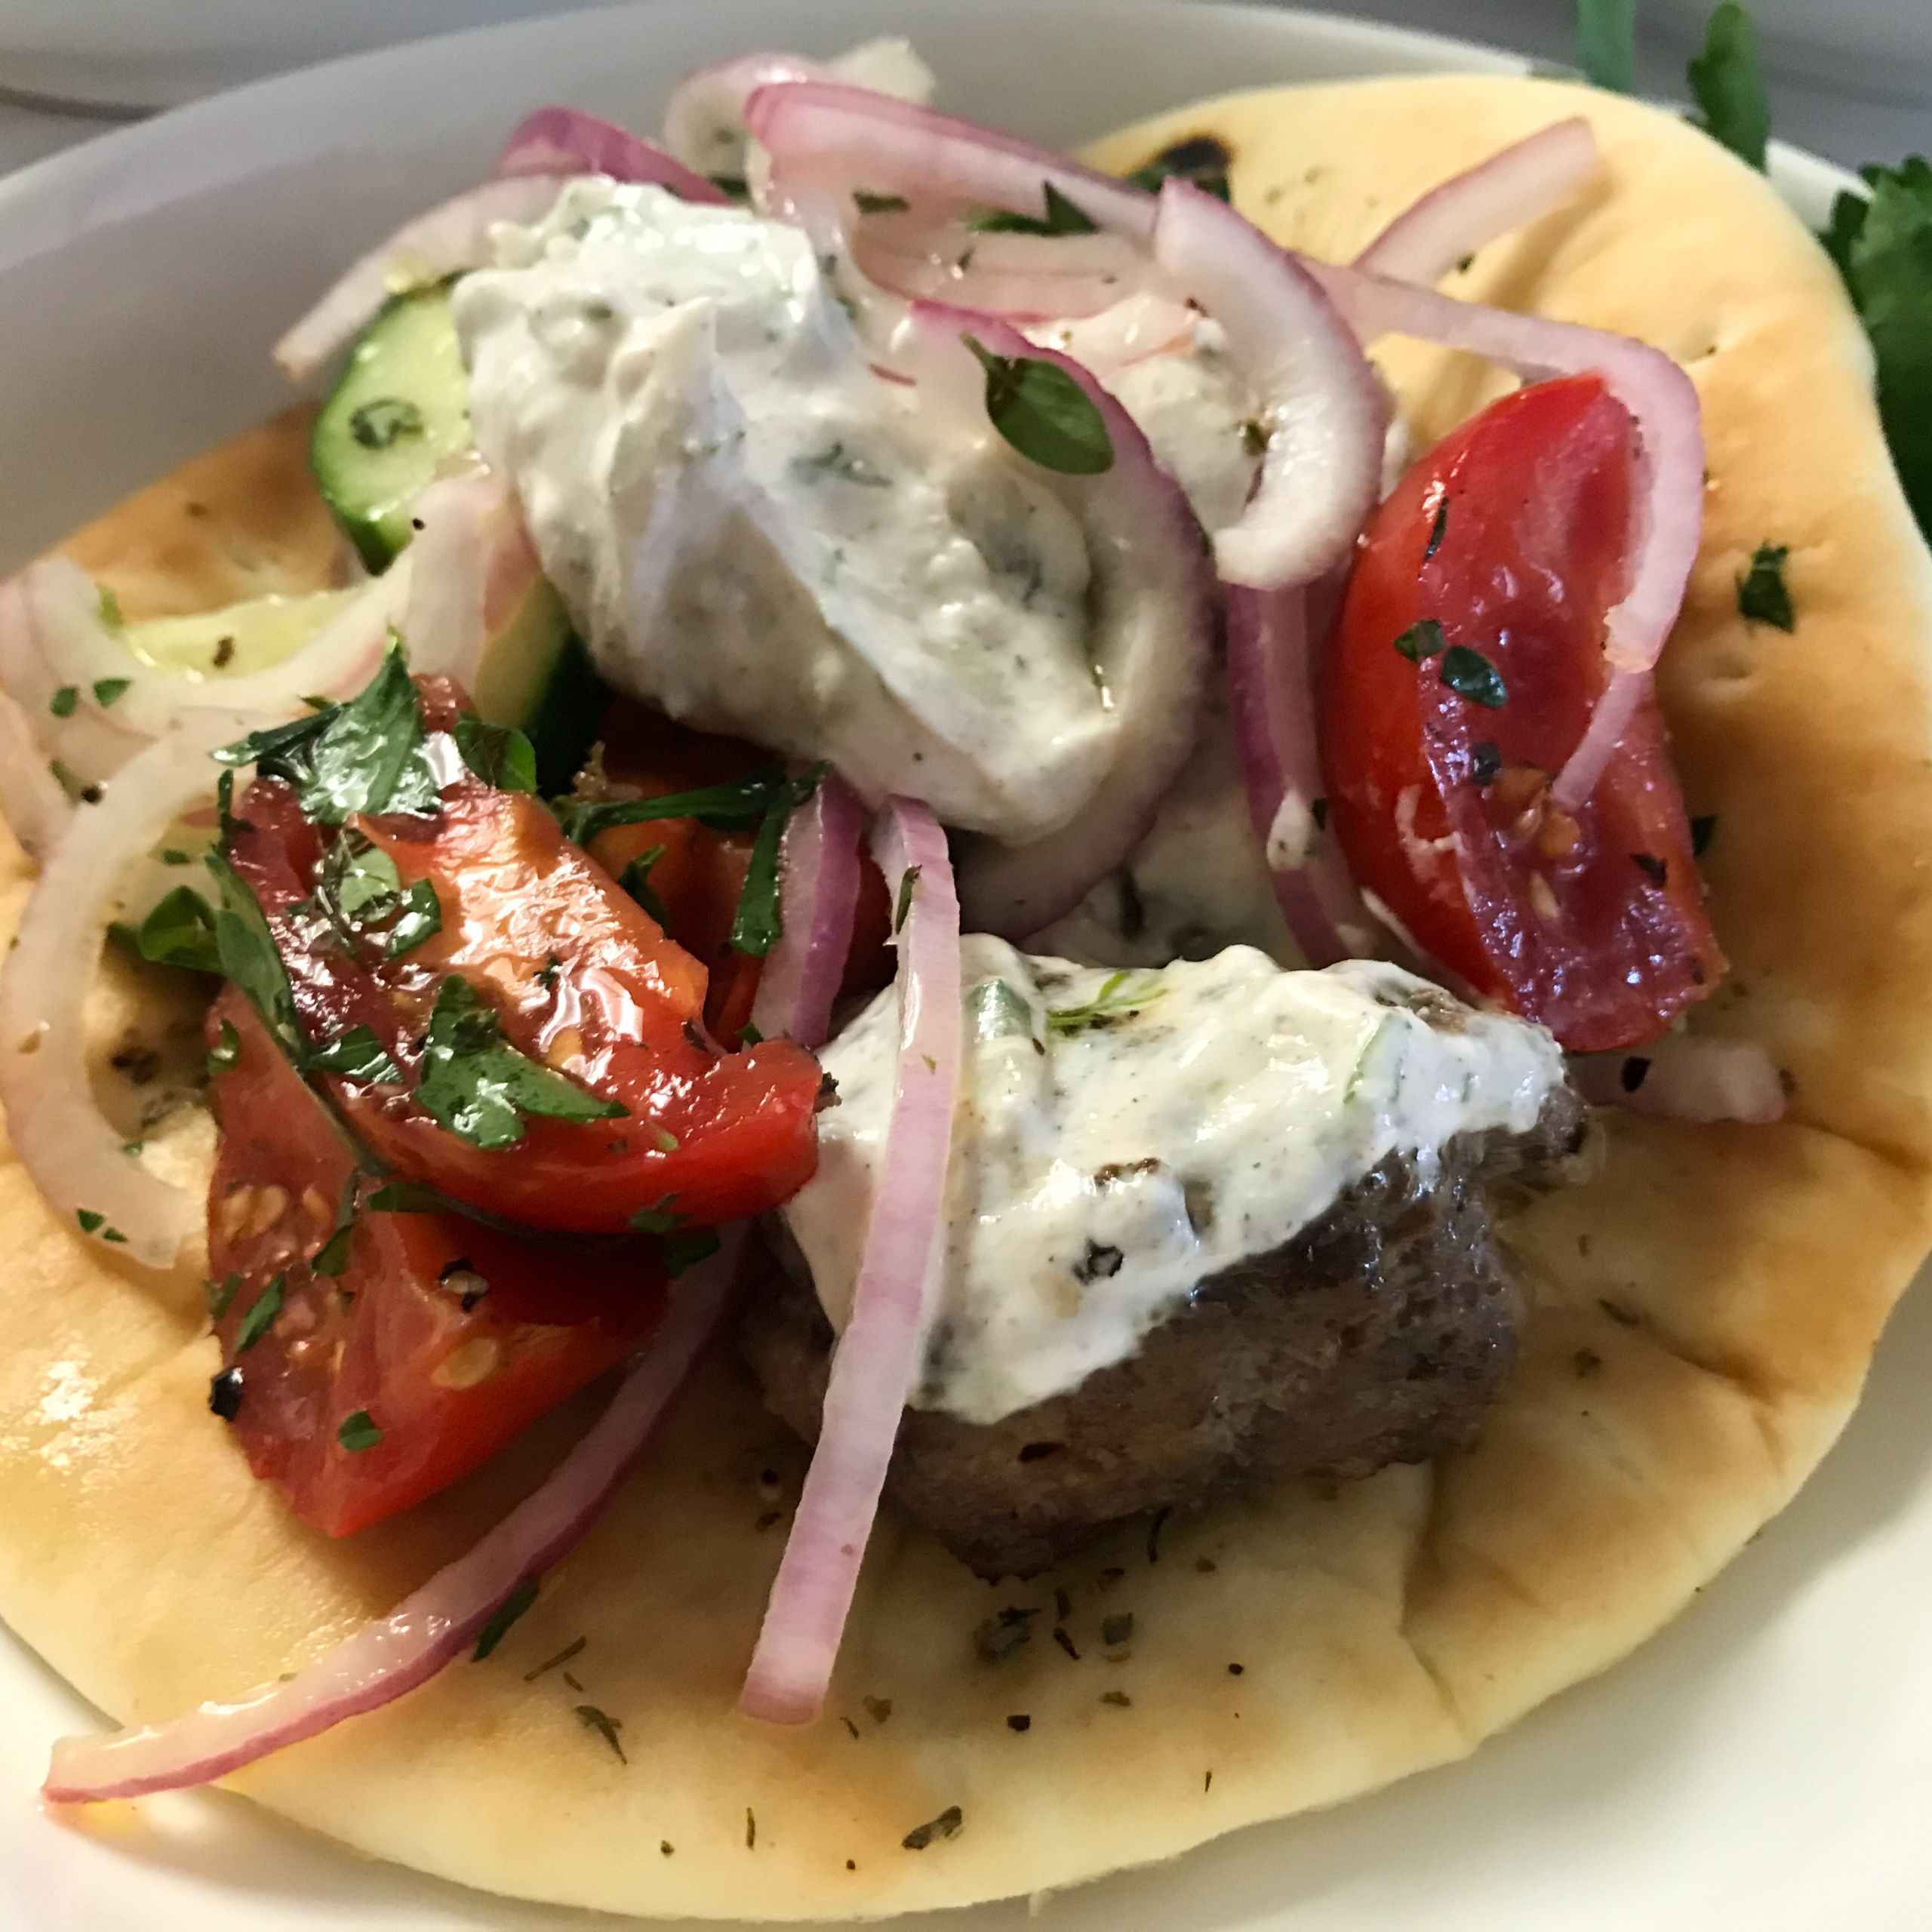 lamb meatball souvlaki on pita with toppings | my curated tastes